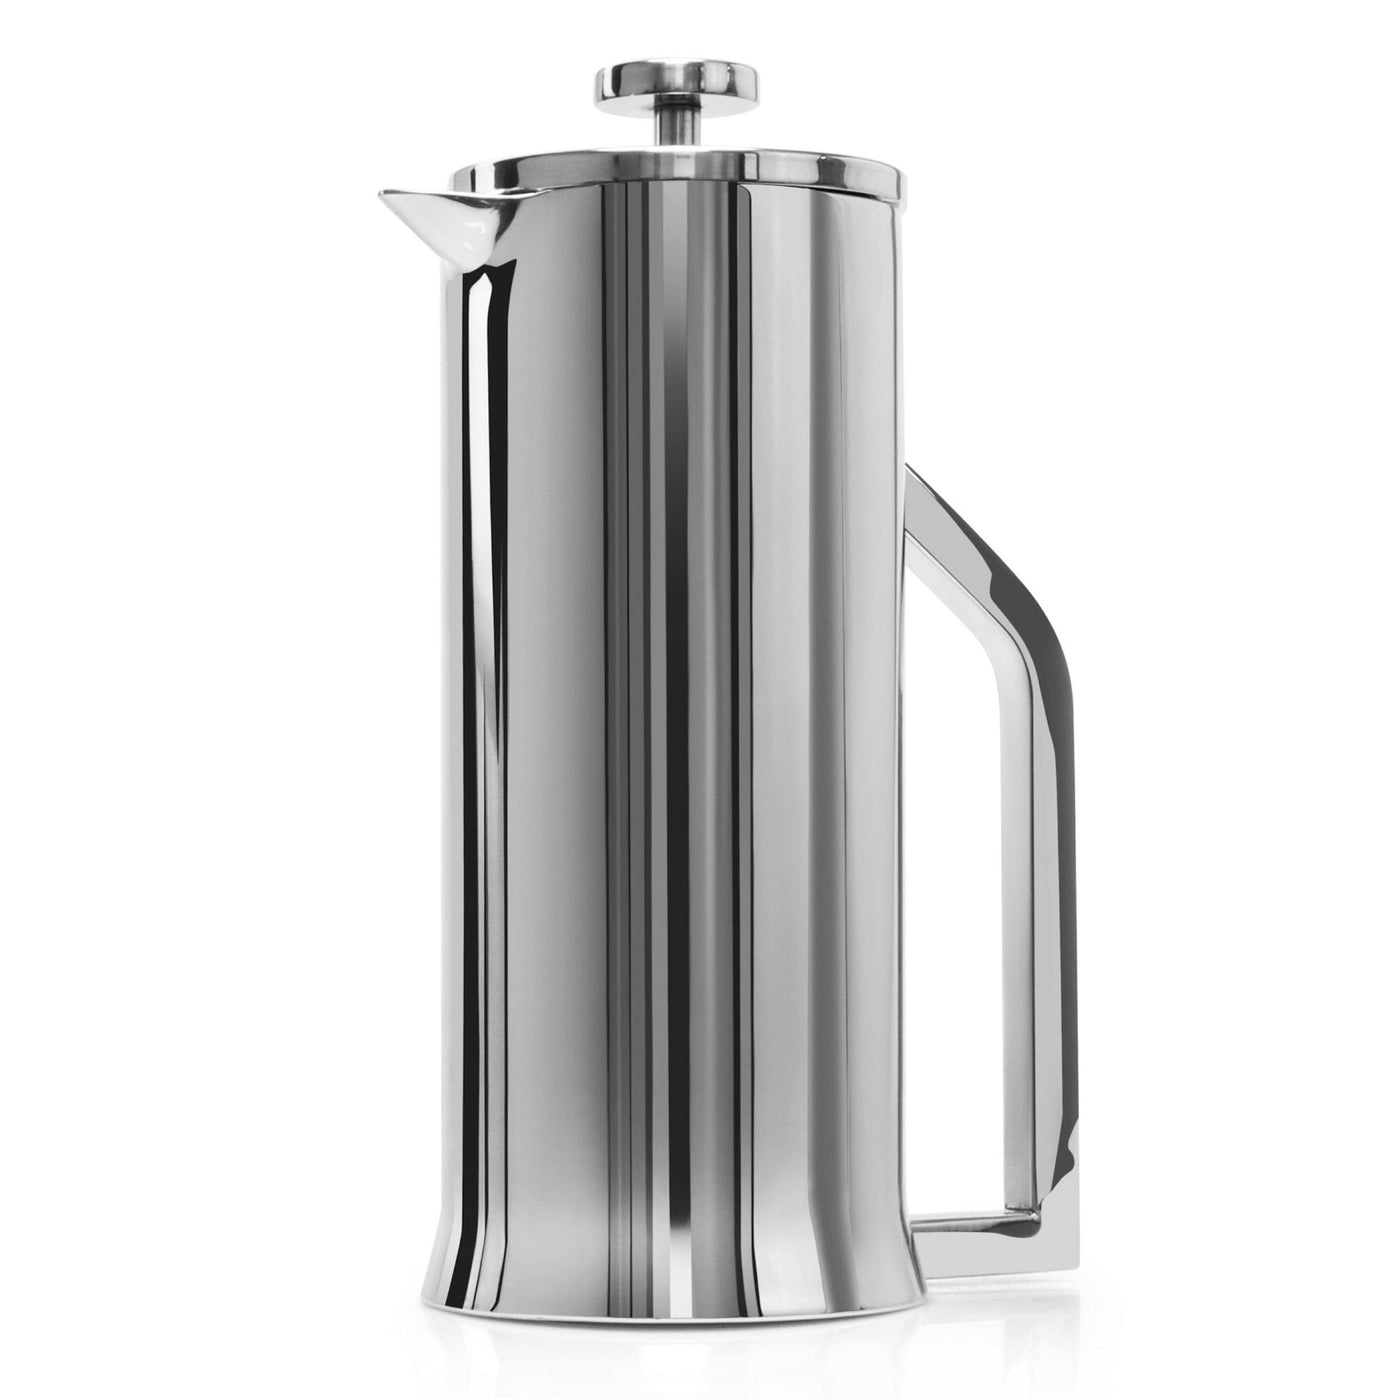 SALE: Stainless Steel French Press Coffee Maker (34 oz.)